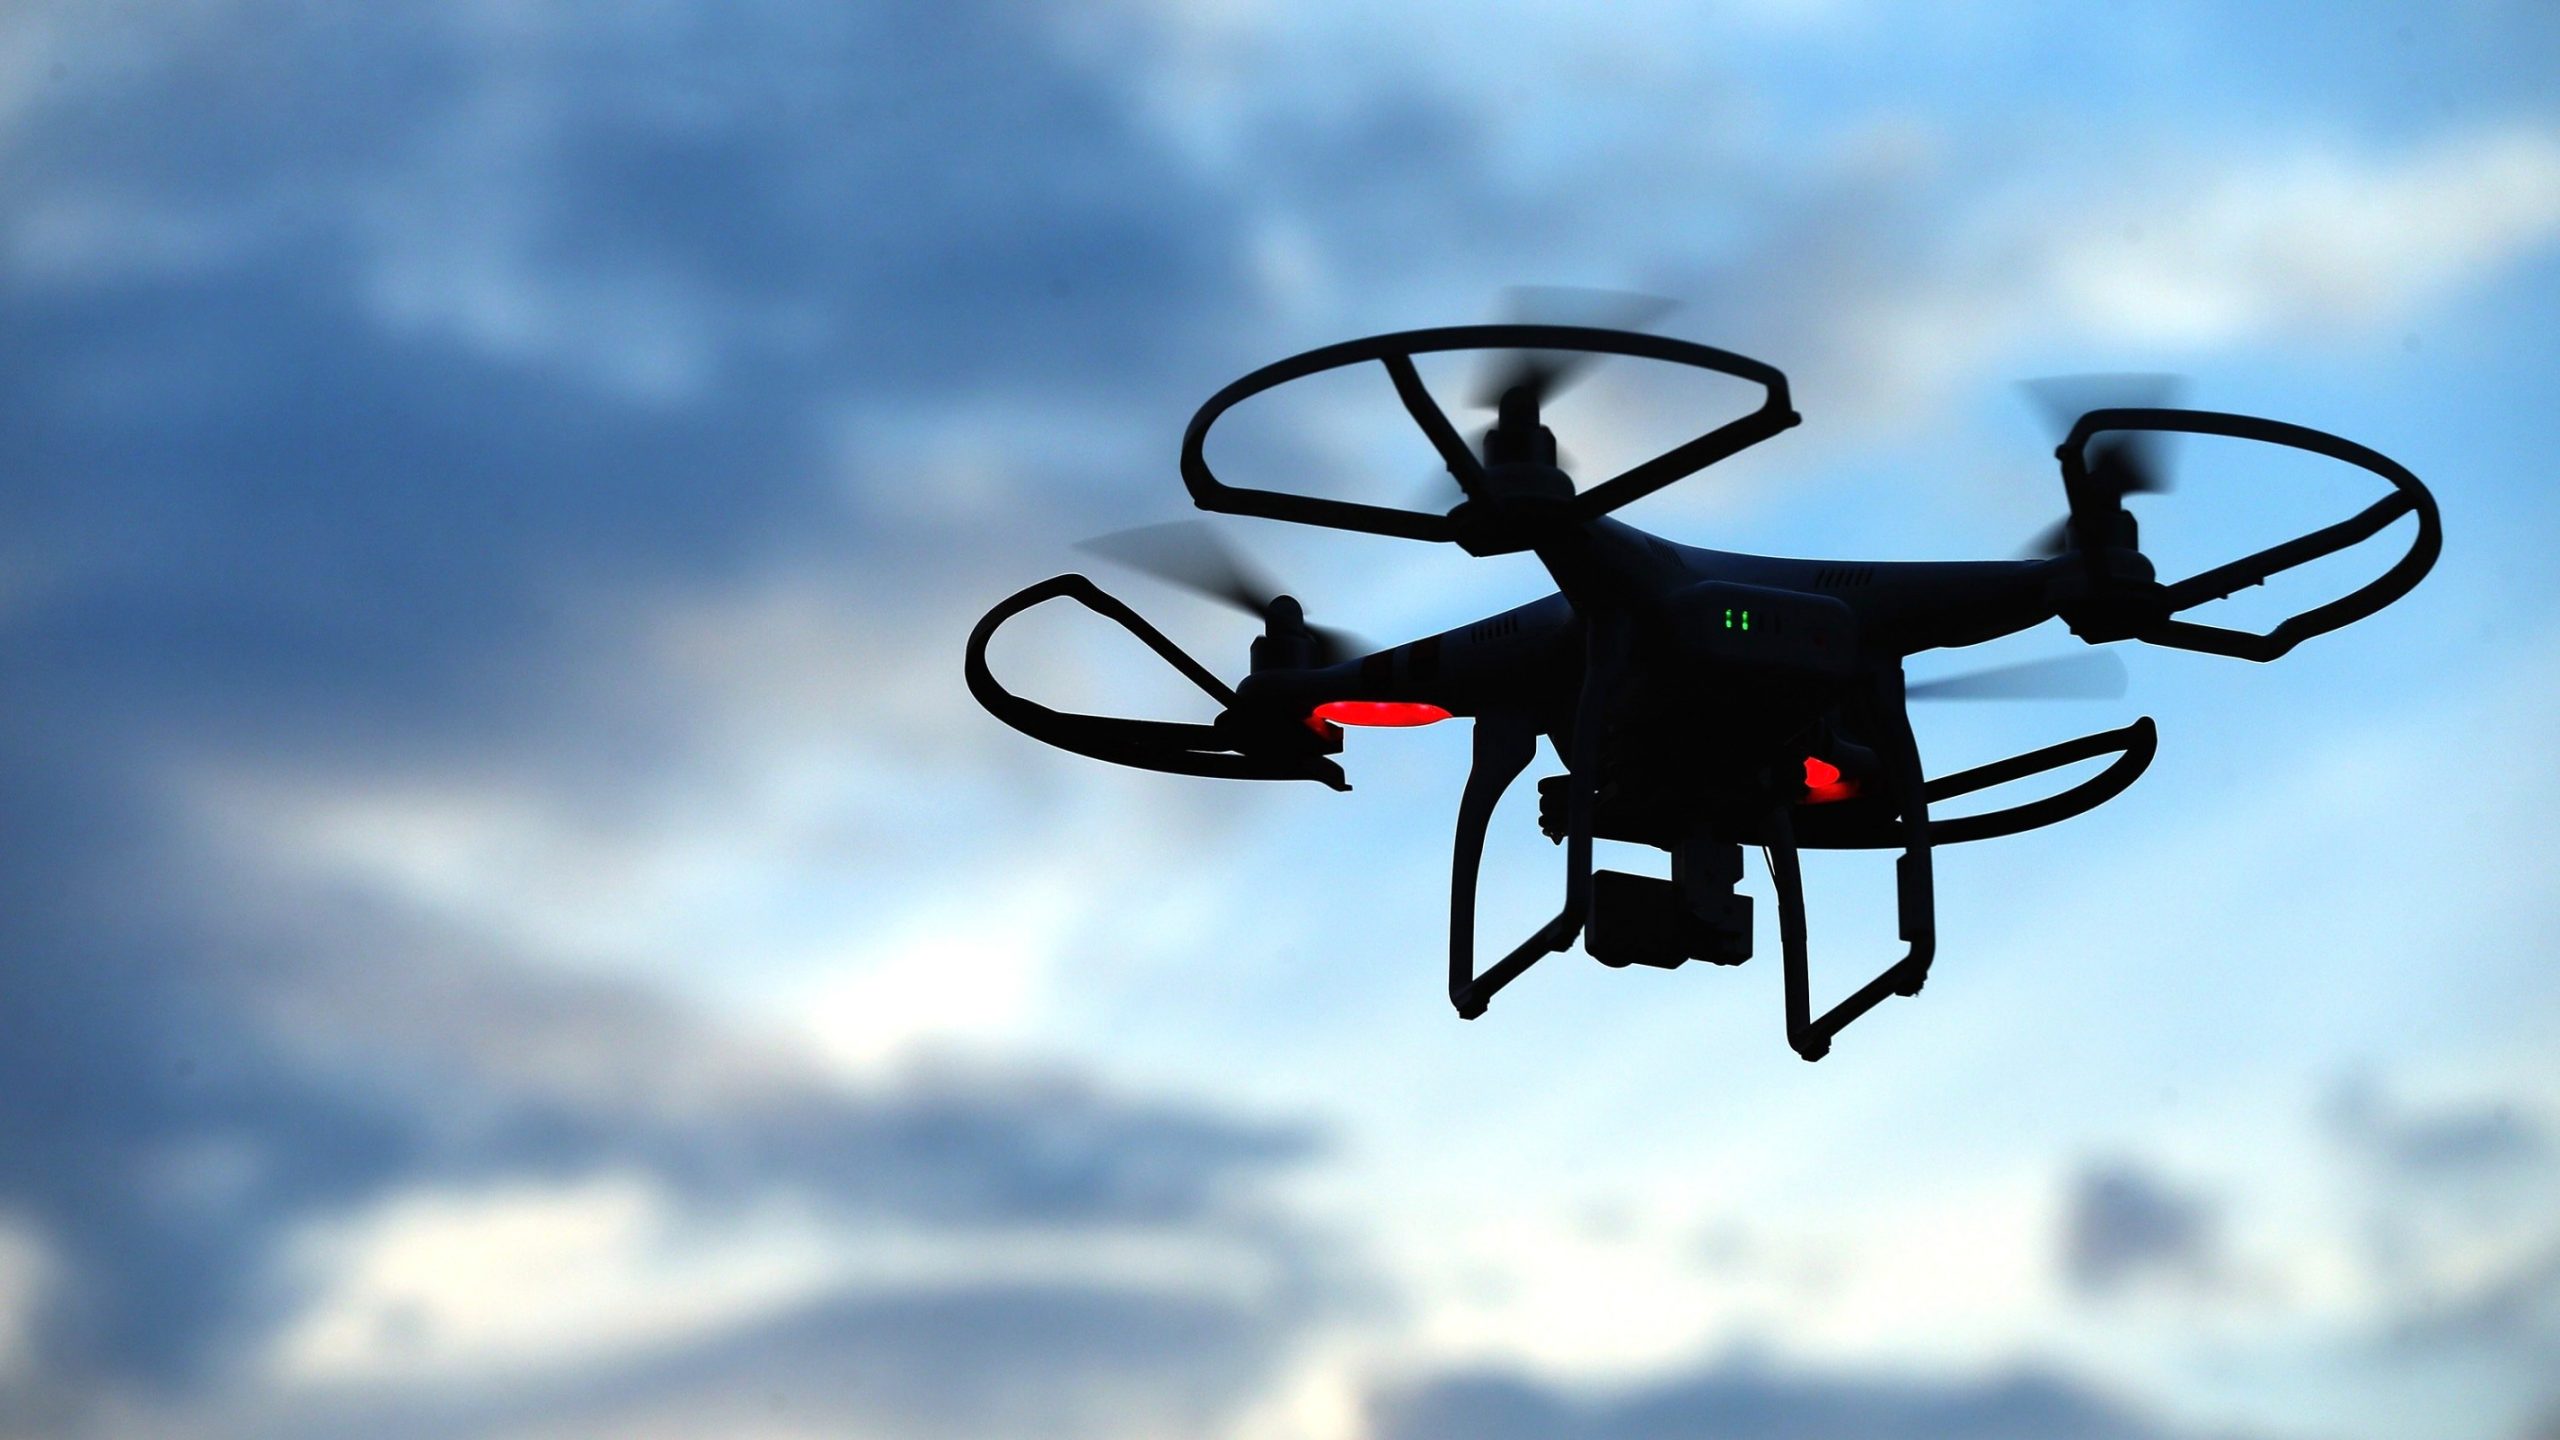 Cheap Vpn In Fisher Tx Dans Texas Man Allegedly Used Dji Drone to Smuggle Drugs to Federal ...